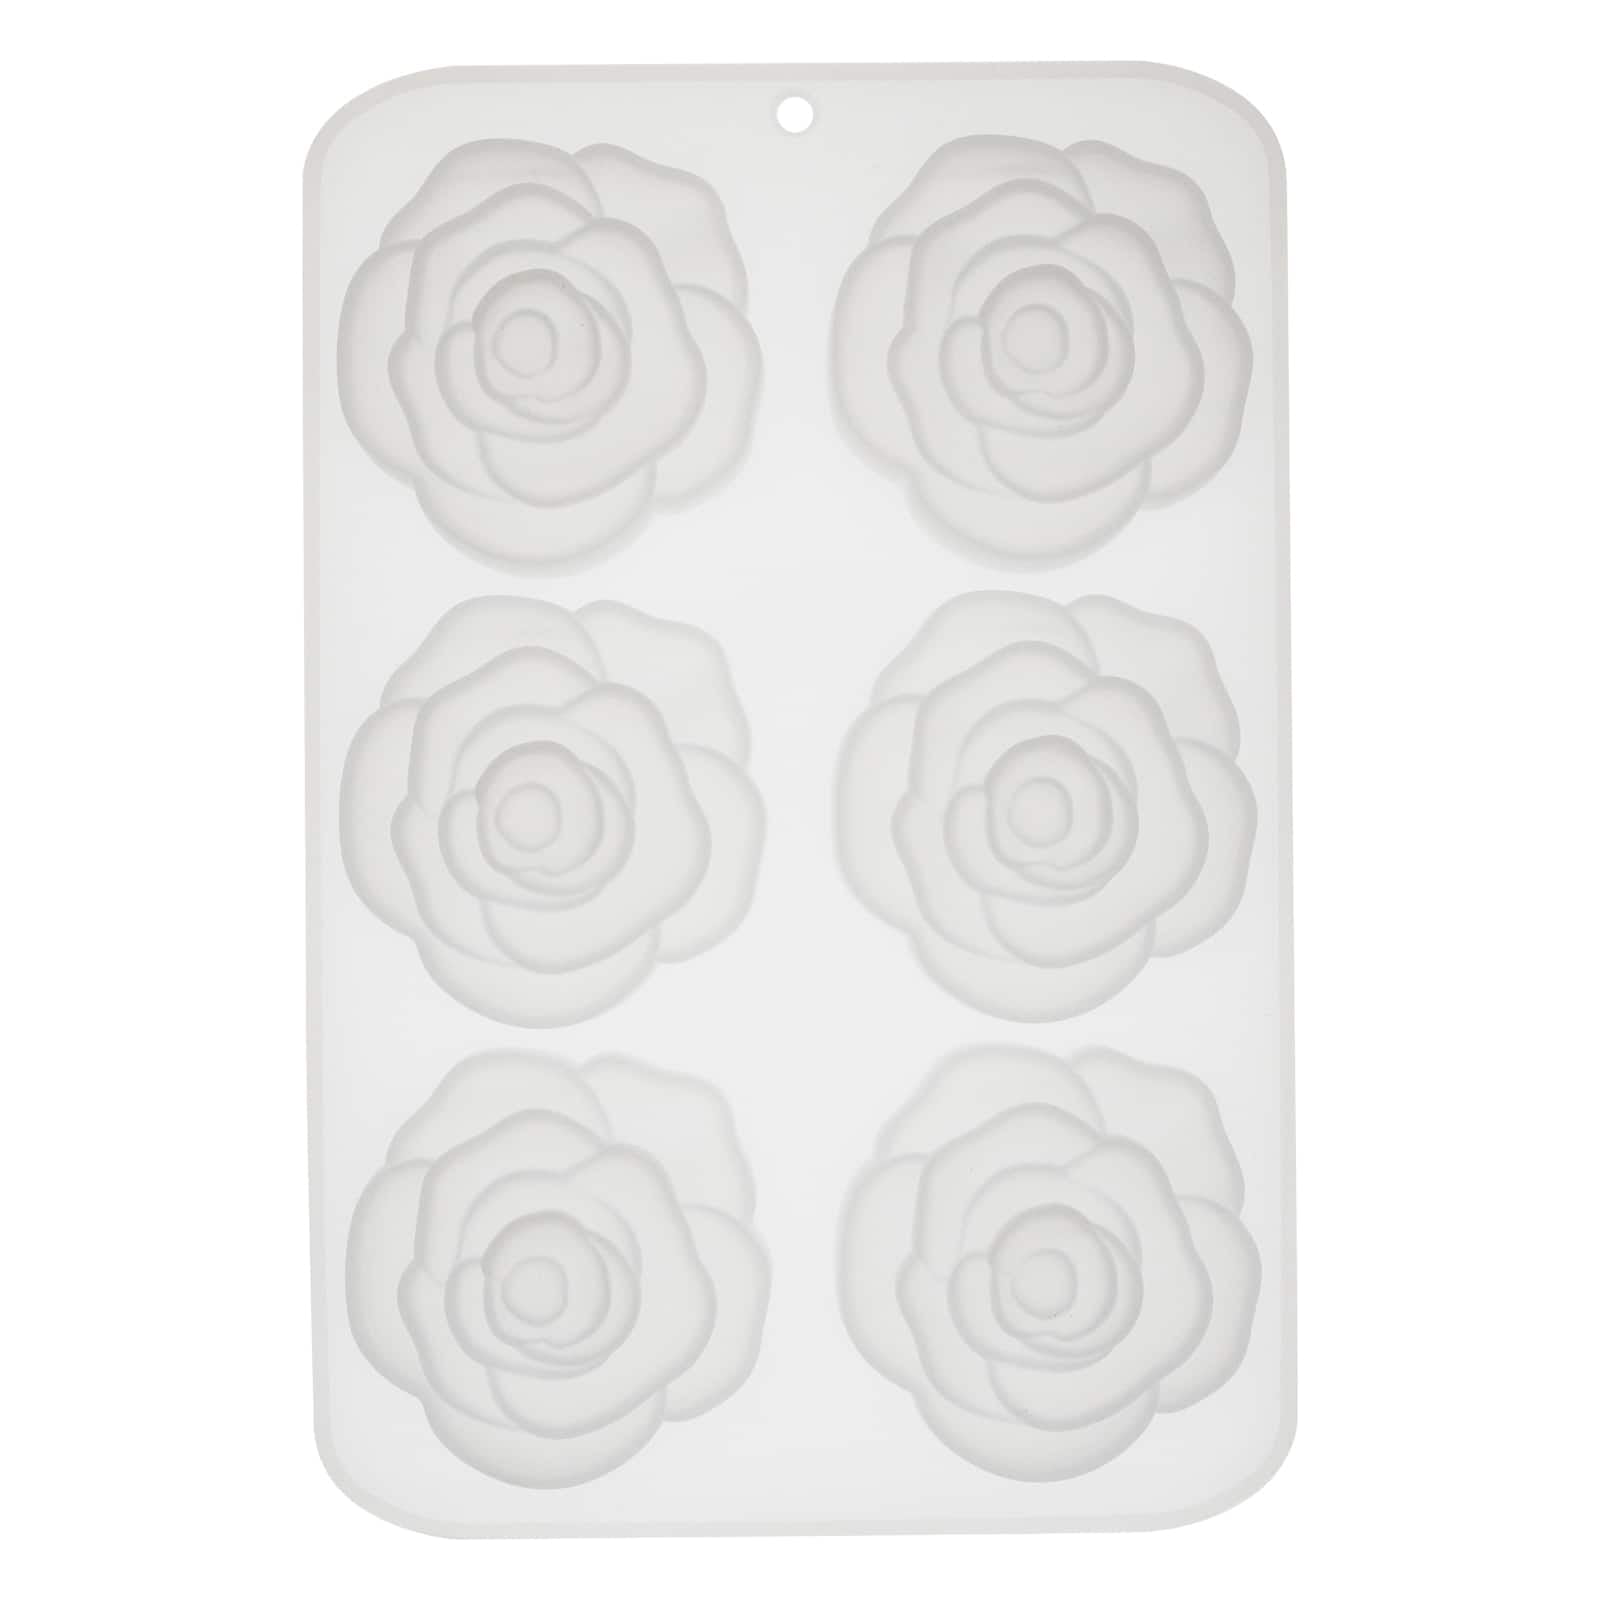 MICHAELS Bulk 12 Pack:  Silicone Rose Soap Mold by Make Market®